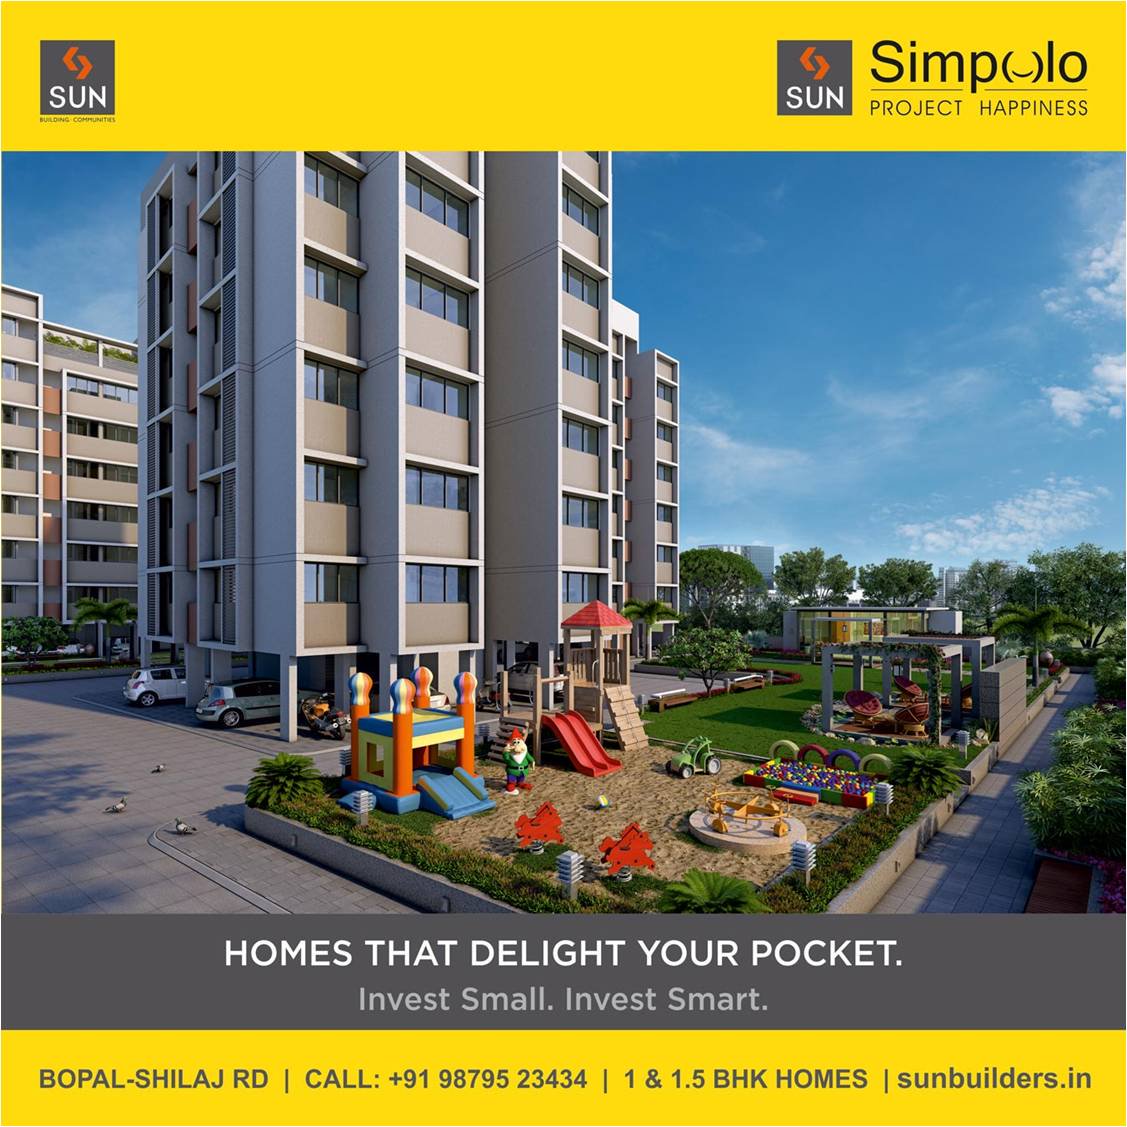 Invest at #SunSimpolo, 1 & 1.5 BHK homes starting @ 14.33 lacs!
http://t.co/ek5nwpbmGK http://t.co/t199T2Q4fE